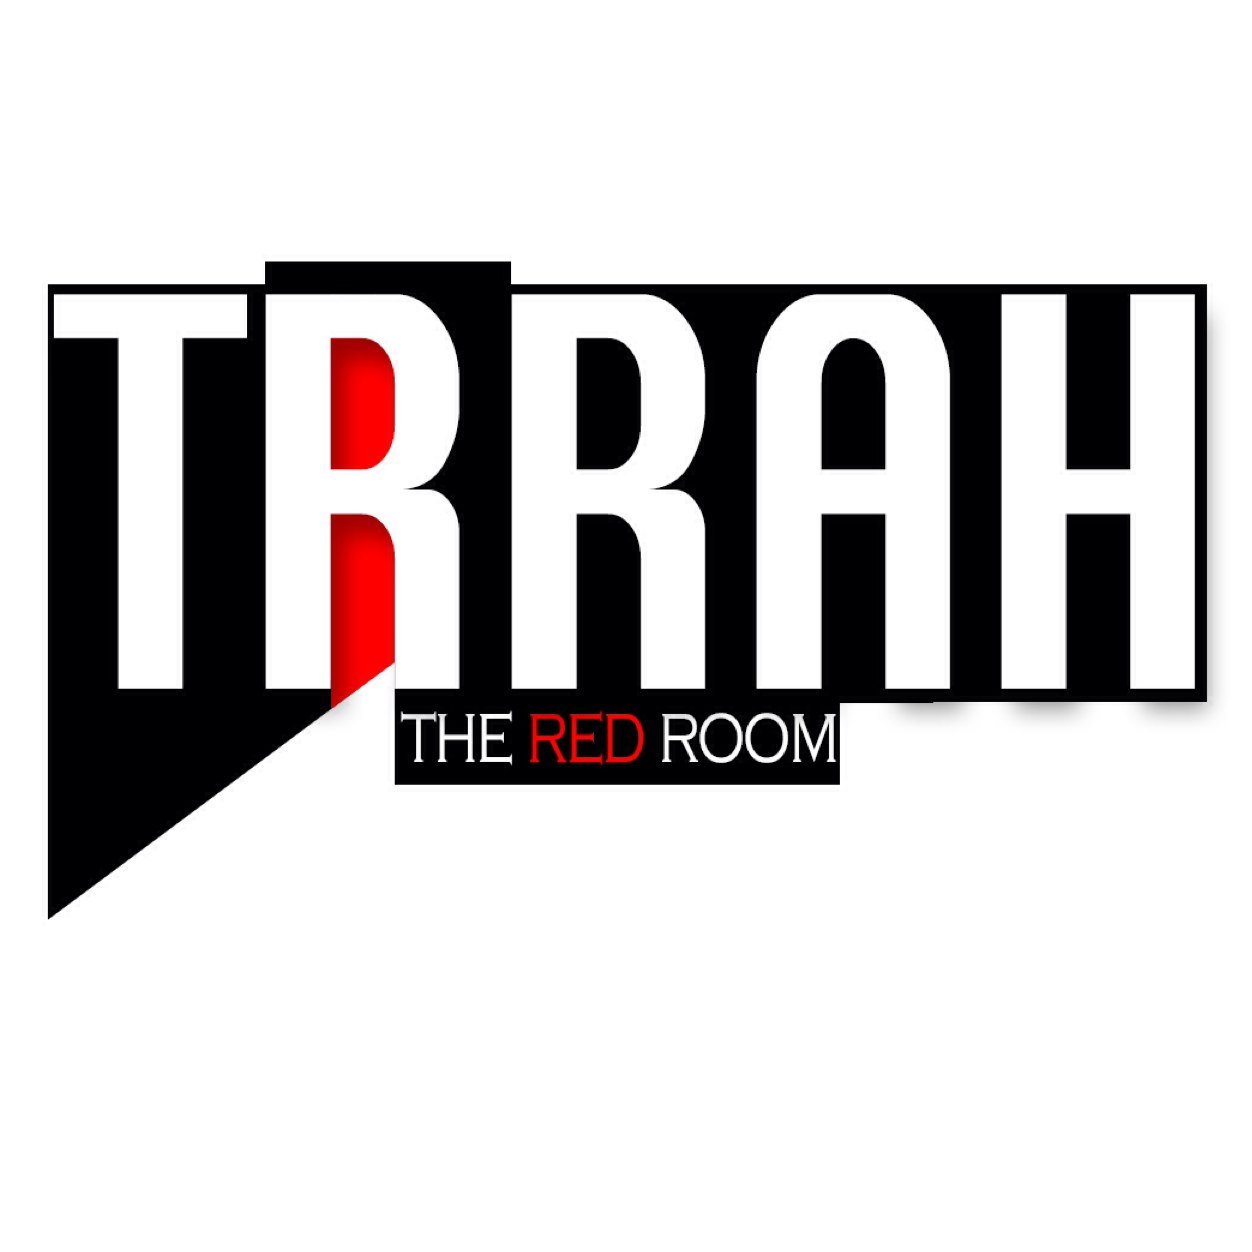 Networking & Promoting Artist, Producers, Models, Photograhers, Clothing Designers, Custom Designers and more. 
Join The Trrah Movement!!!